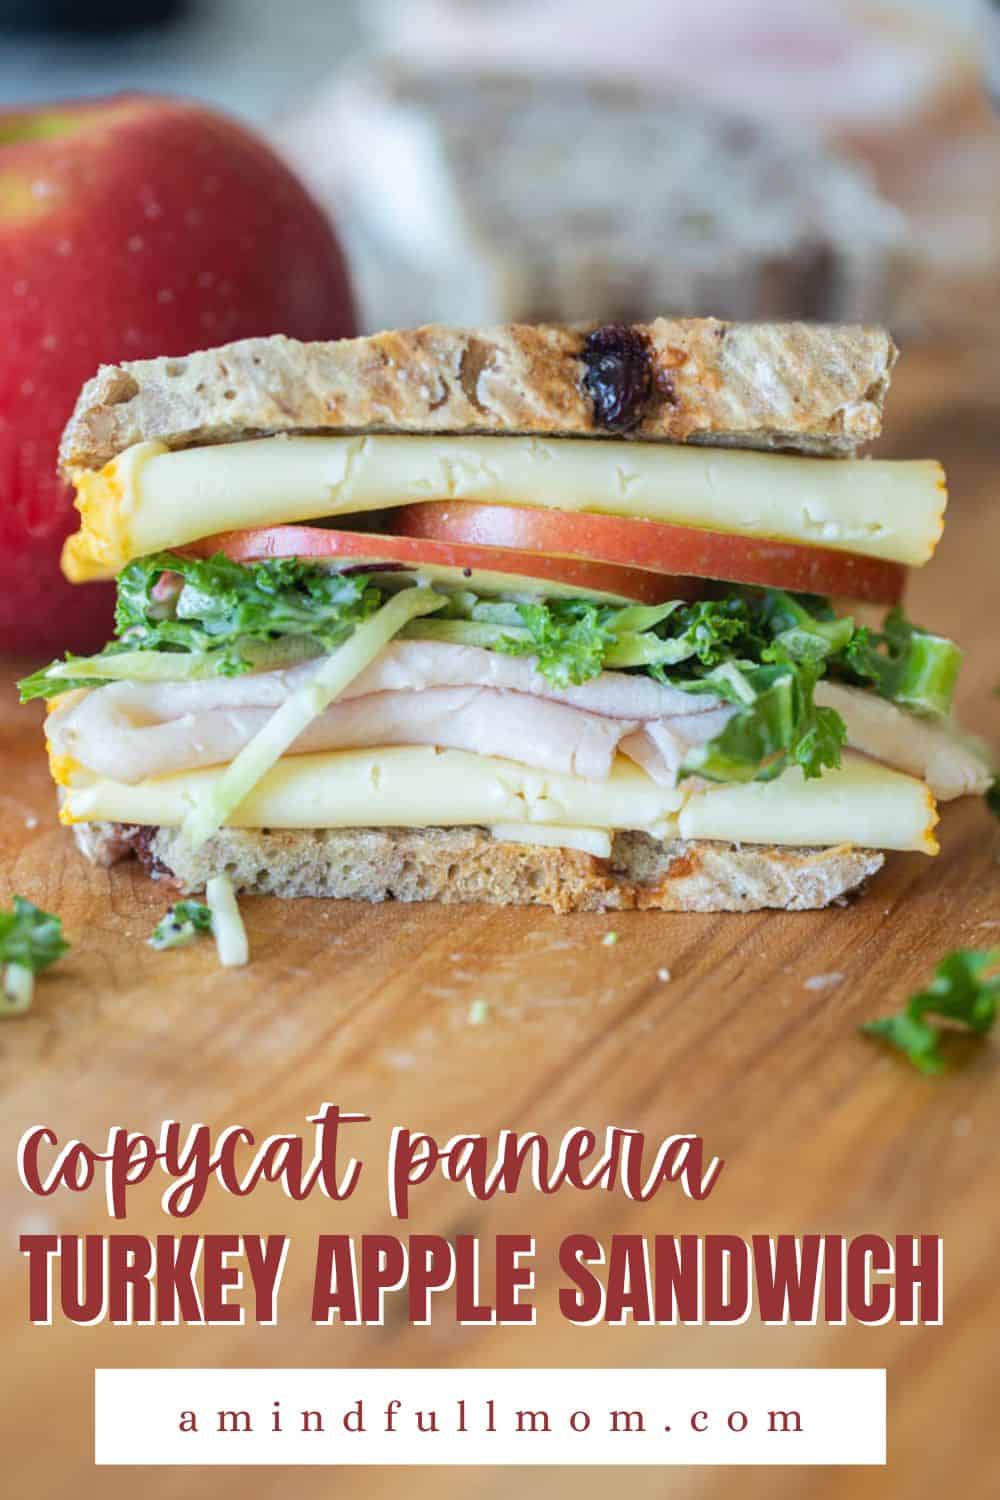 If you love Panera Sandwiches, you will LOVE this Copycat Panera Roasted Turkey, Apple, and Cheddar Sandwich! Made with slices of roasted turkey, sweet apples, and sharp cheddar cheese on homemade cranberry walnut bread, this is the best recipe for a turkey sandwich!